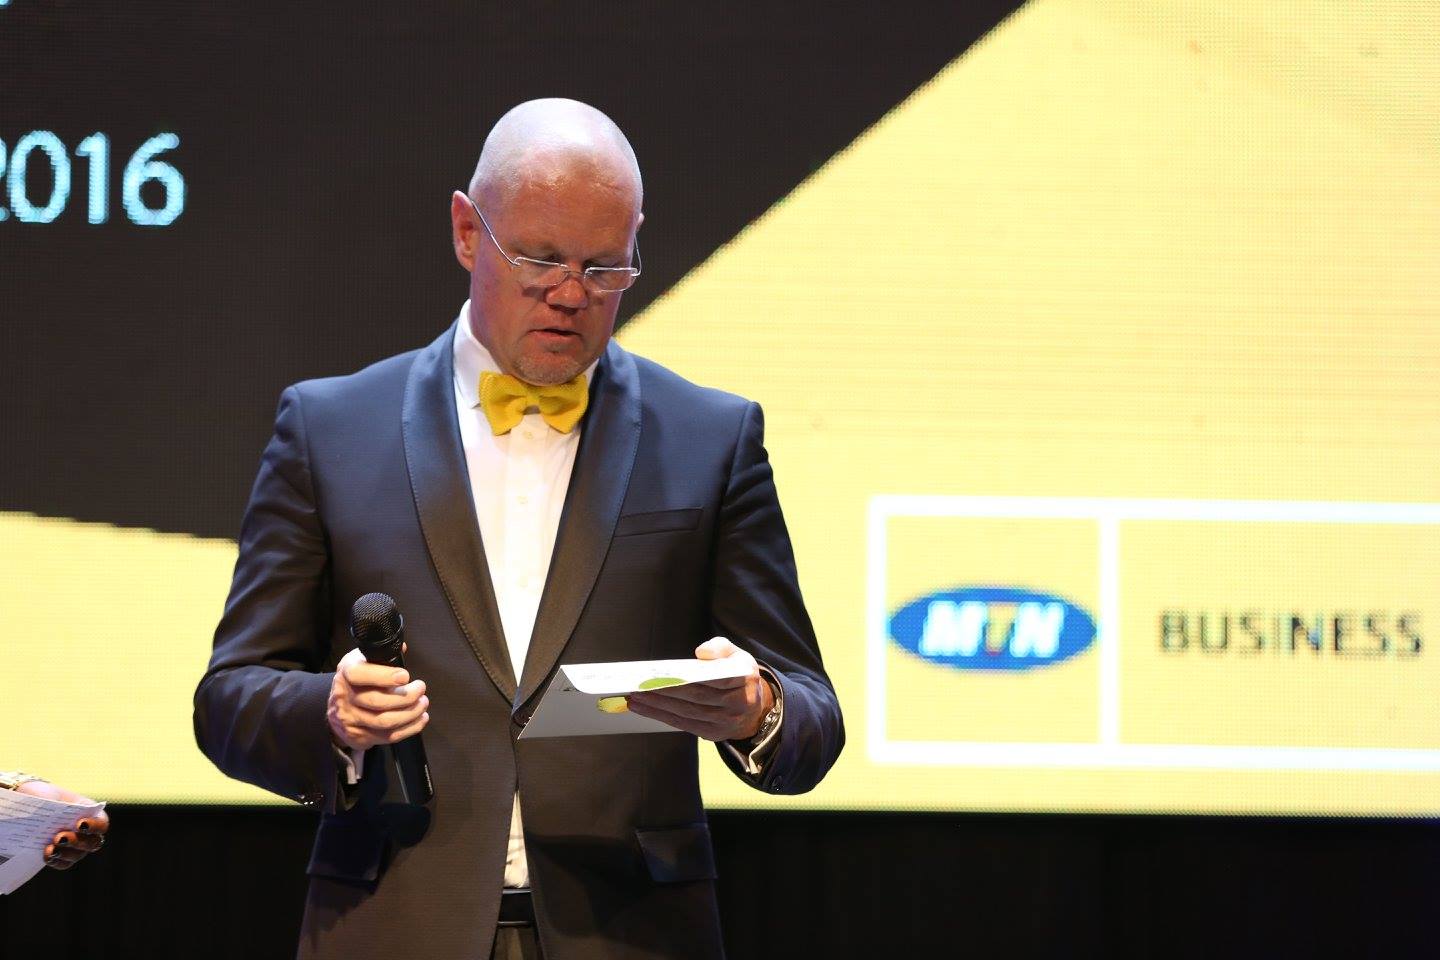 MTN’s CEO Brian Gouldie addresses the guests and media the MTN Women in Business awards 2016 held at Serena Hotel. This year’s awards had a theme of women “Using technology to manage their businesses” . The awards were organized to recognize outstanding women in Business In the categories of Excellence In ICT, CEO of the year, Mobile Money Financial Services and a Public Choice Award.